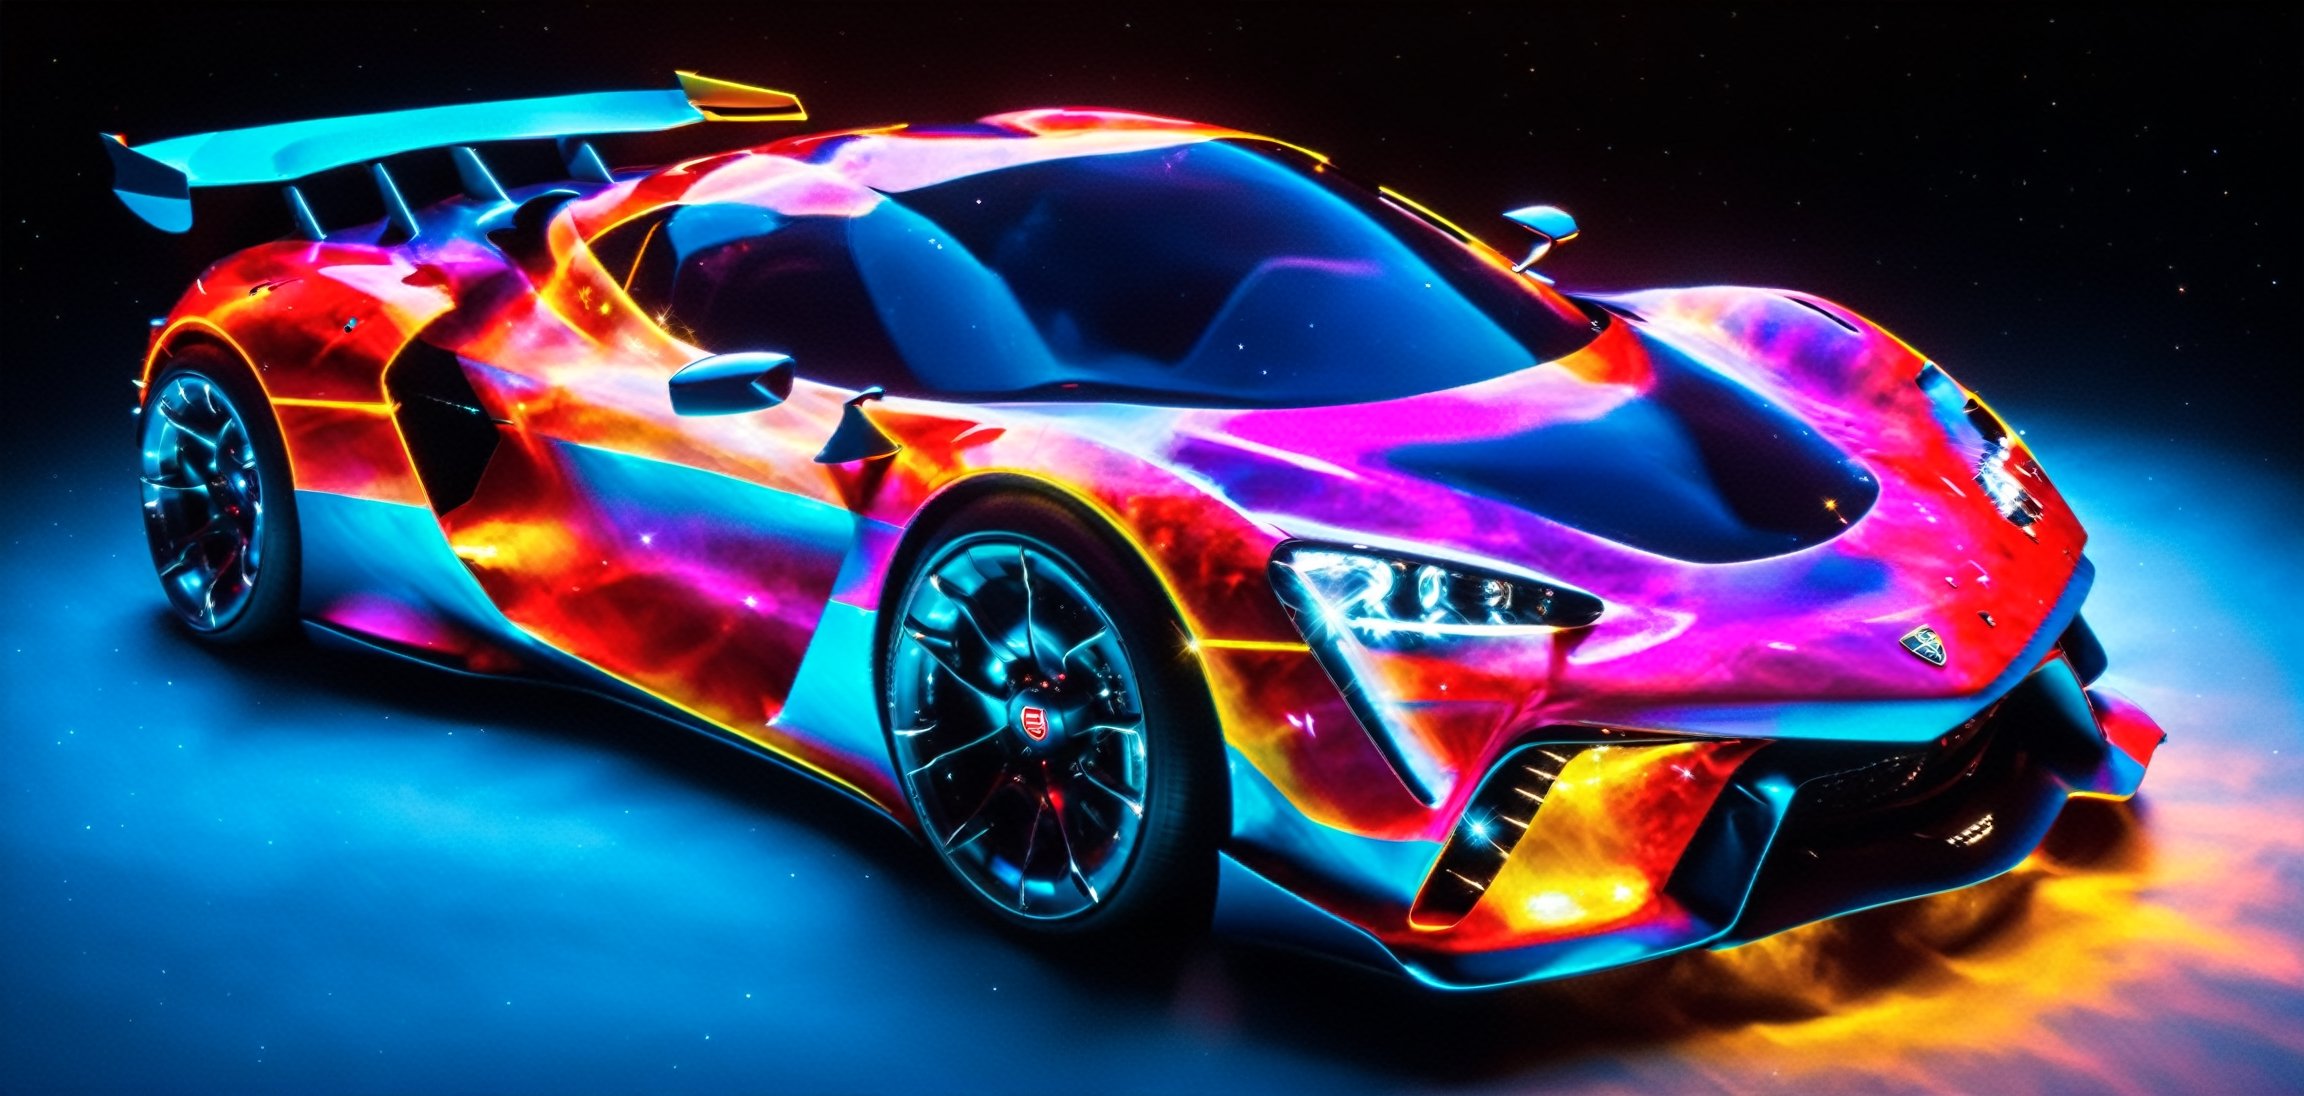 ultra-detailed, 8K), Futuristic hyper-car/supercar, dreamlikeart, galaxy, outer space, nebula, star, [cyberpunked] race car with race livery wide body kit,( neon glowing ring in tiers), street racing-inspired, Drifting inspired, LED, ((Twin headlights)), (((Bright neon color racing stripes))), (Black racing wheels), Wheel spin showing motion, Show car in motion, Burnout, wide body kit, modified car, racing livery, realistic, ultra highres, (full dual colour neon lights:1.2), (hard dual color lighting:1.4), (detailed background), (ultra detailed), intricate, comprehensive cinematic, magical photography, (gradients), glossy, Night with galaxy sky, Fast action style, fire out of tail pipes, Sideways drifting in to a turn, Neon galaxy metalic paint with race stripes, GTR Nismo, NSX, Porsche, Lamborghini, Ferrari, Bugatti, Ariel Atom, BMW, Audi, Mazda, Toyota supra, Lamborghini Aventador, aesthetic, intricate, realistic, Neon Paint, streaks of fire, (((depth of field))), cinematic lighting, cinematic lighting, speed lines, (masterpiece), best quality, masterpiece, best quality, (masterpiece:1.2), (best quality)
,neon style,dc100,DonMH010D15pl4yXL 